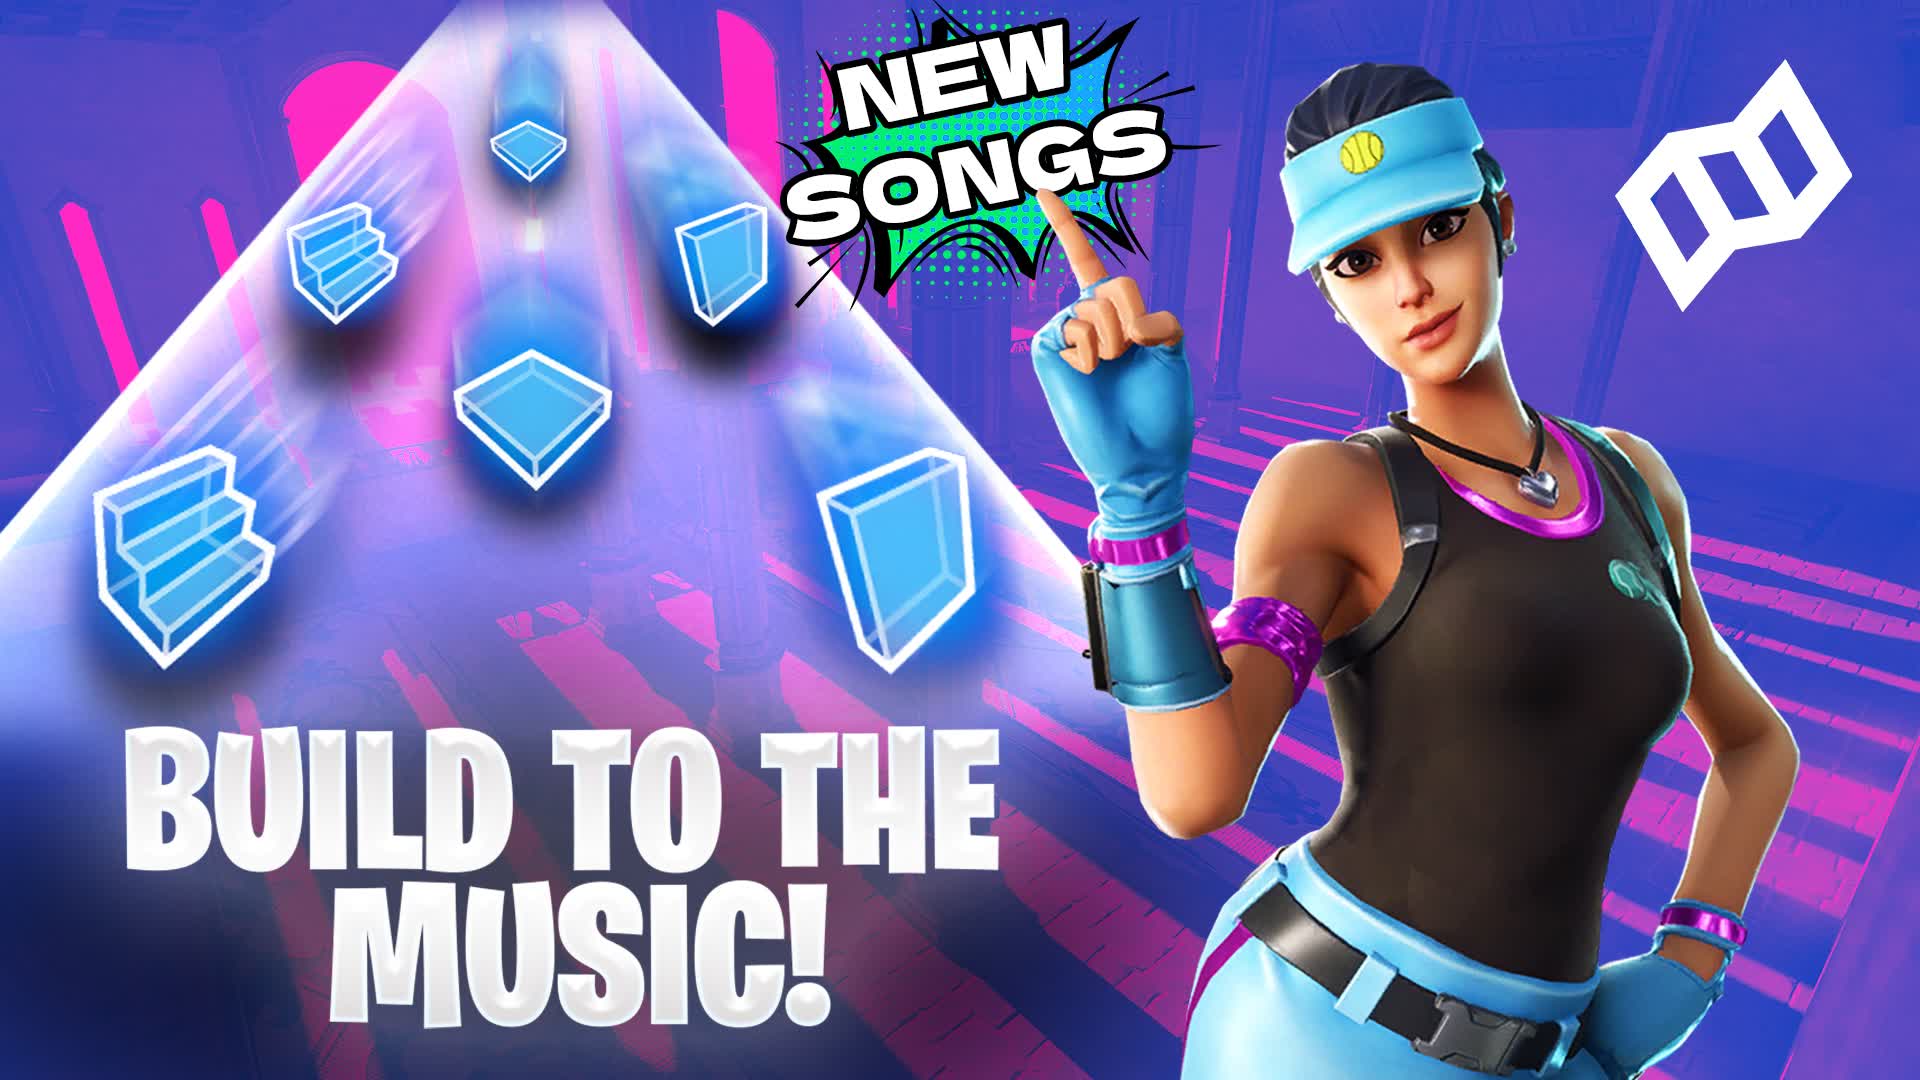 Beat Builder combines base-building with music beats in Fortnite